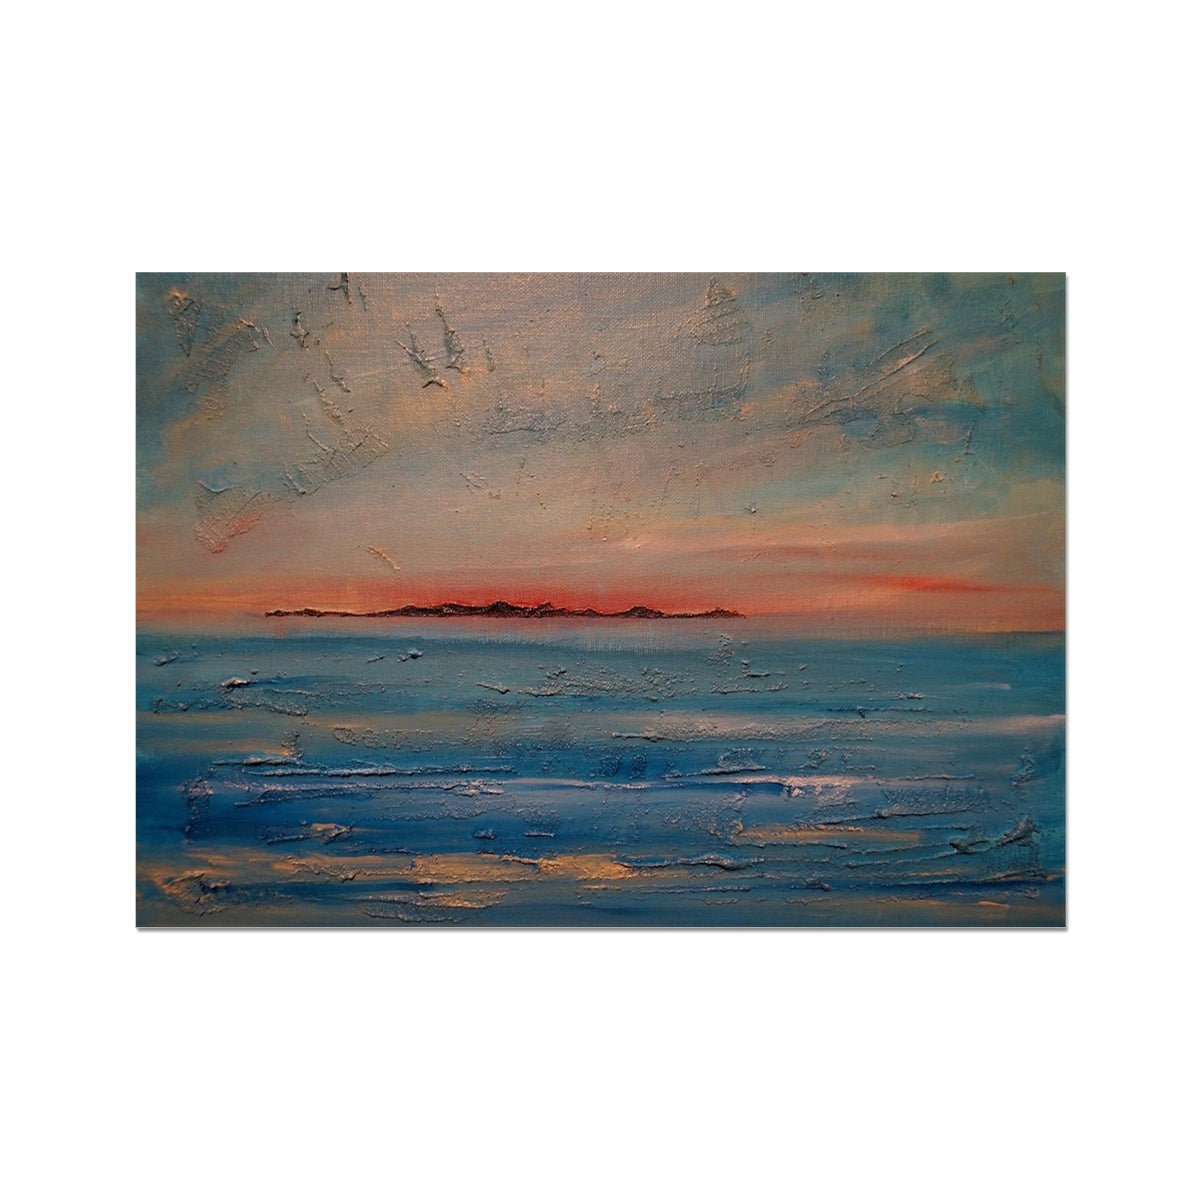 Gigha Sunset Painting | Fine Art Prints From Scotland-Unframed Prints-Hebridean Islands Art Gallery-A2 Landscape-Paintings, Prints, Homeware, Art Gifts From Scotland By Scottish Artist Kevin Hunter